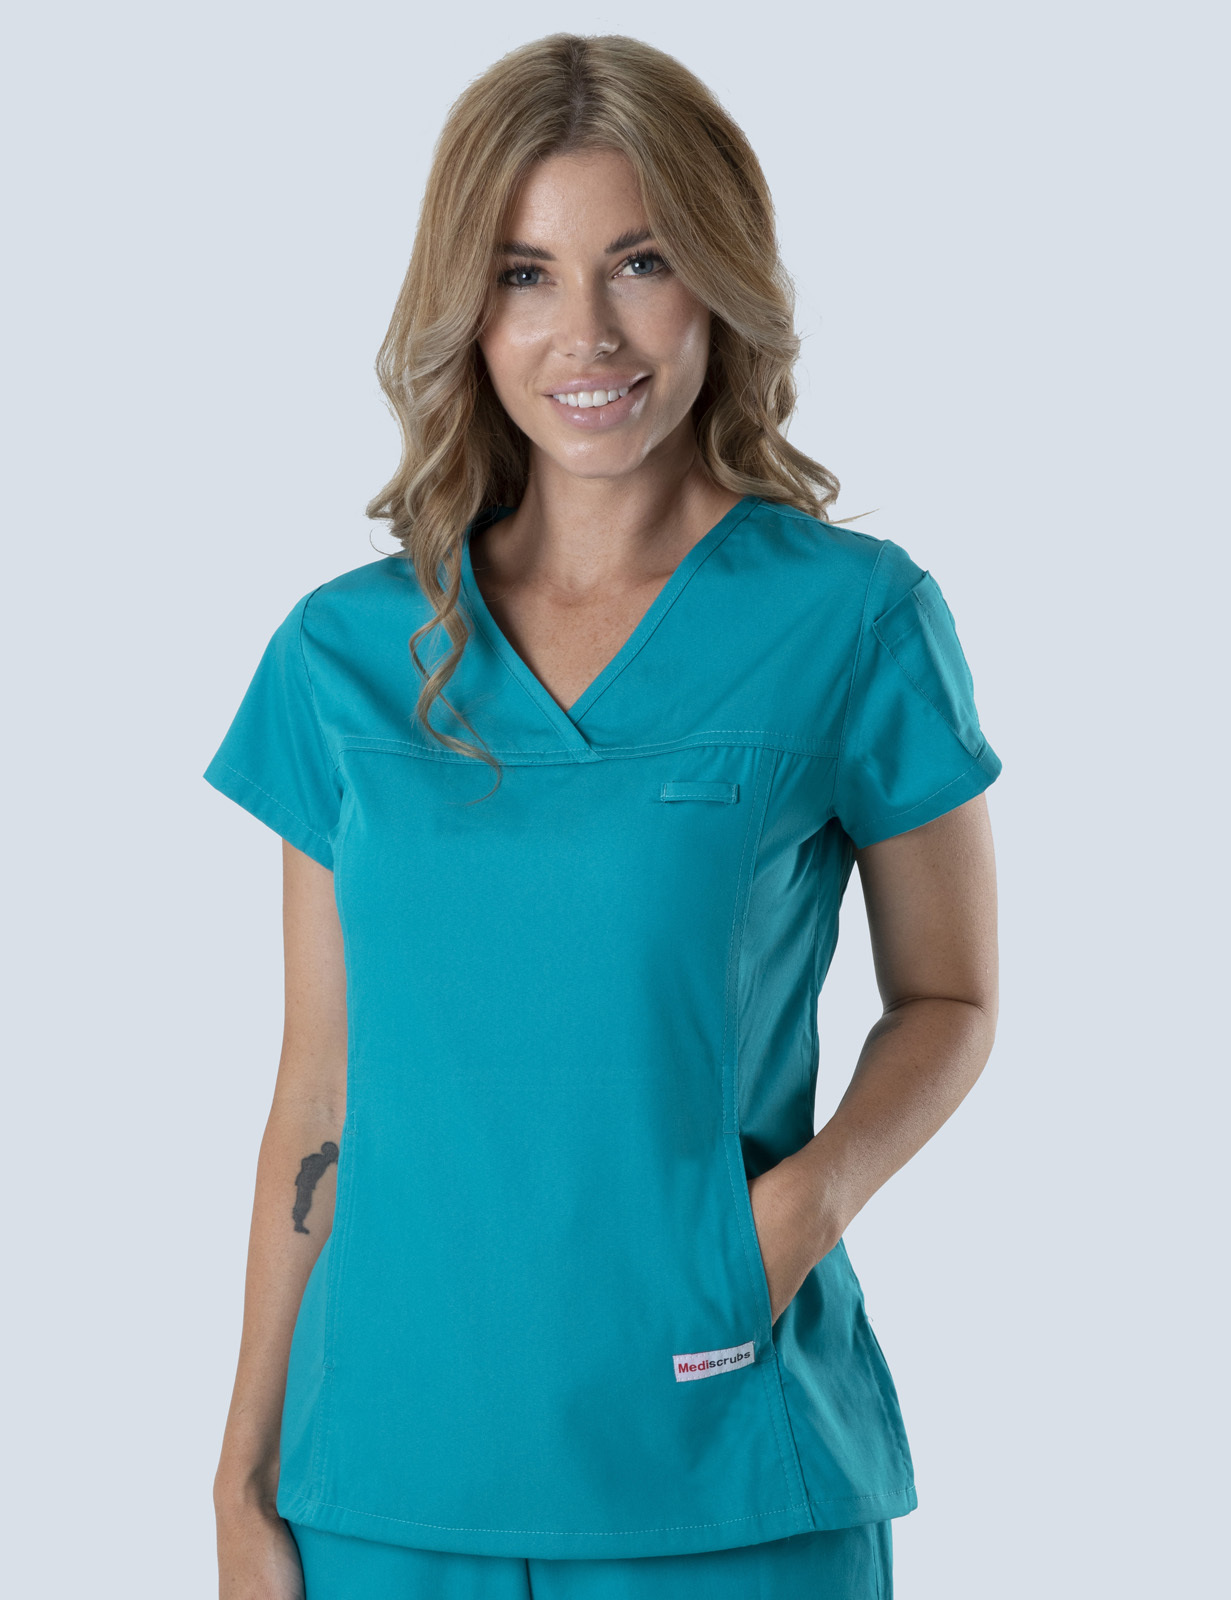 Caboolture Hospital - ICU NUM (Women's Fit Solid Scrub Top in Teal incl Logos)